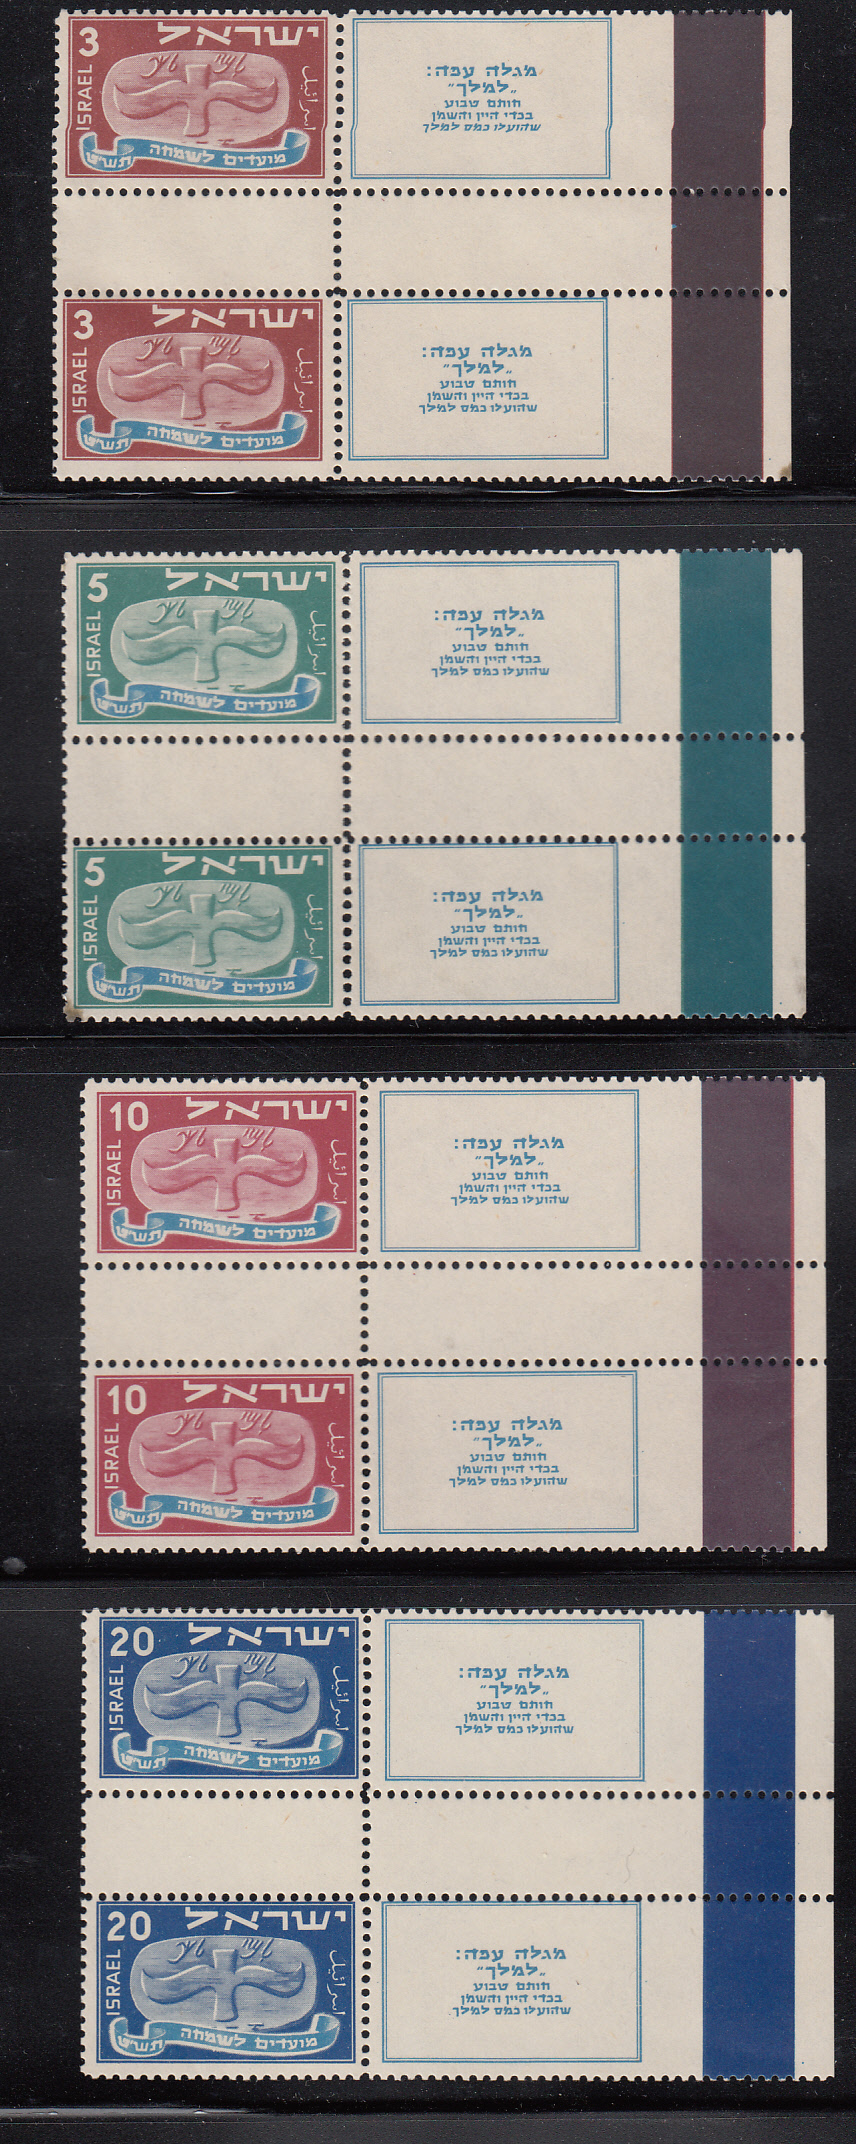 Lot 191 - Israel 1948 Stamps & Covers - Doar Ivri, First Postage Dues & Holiday issues  -  Doron Waide Mail Auction #39